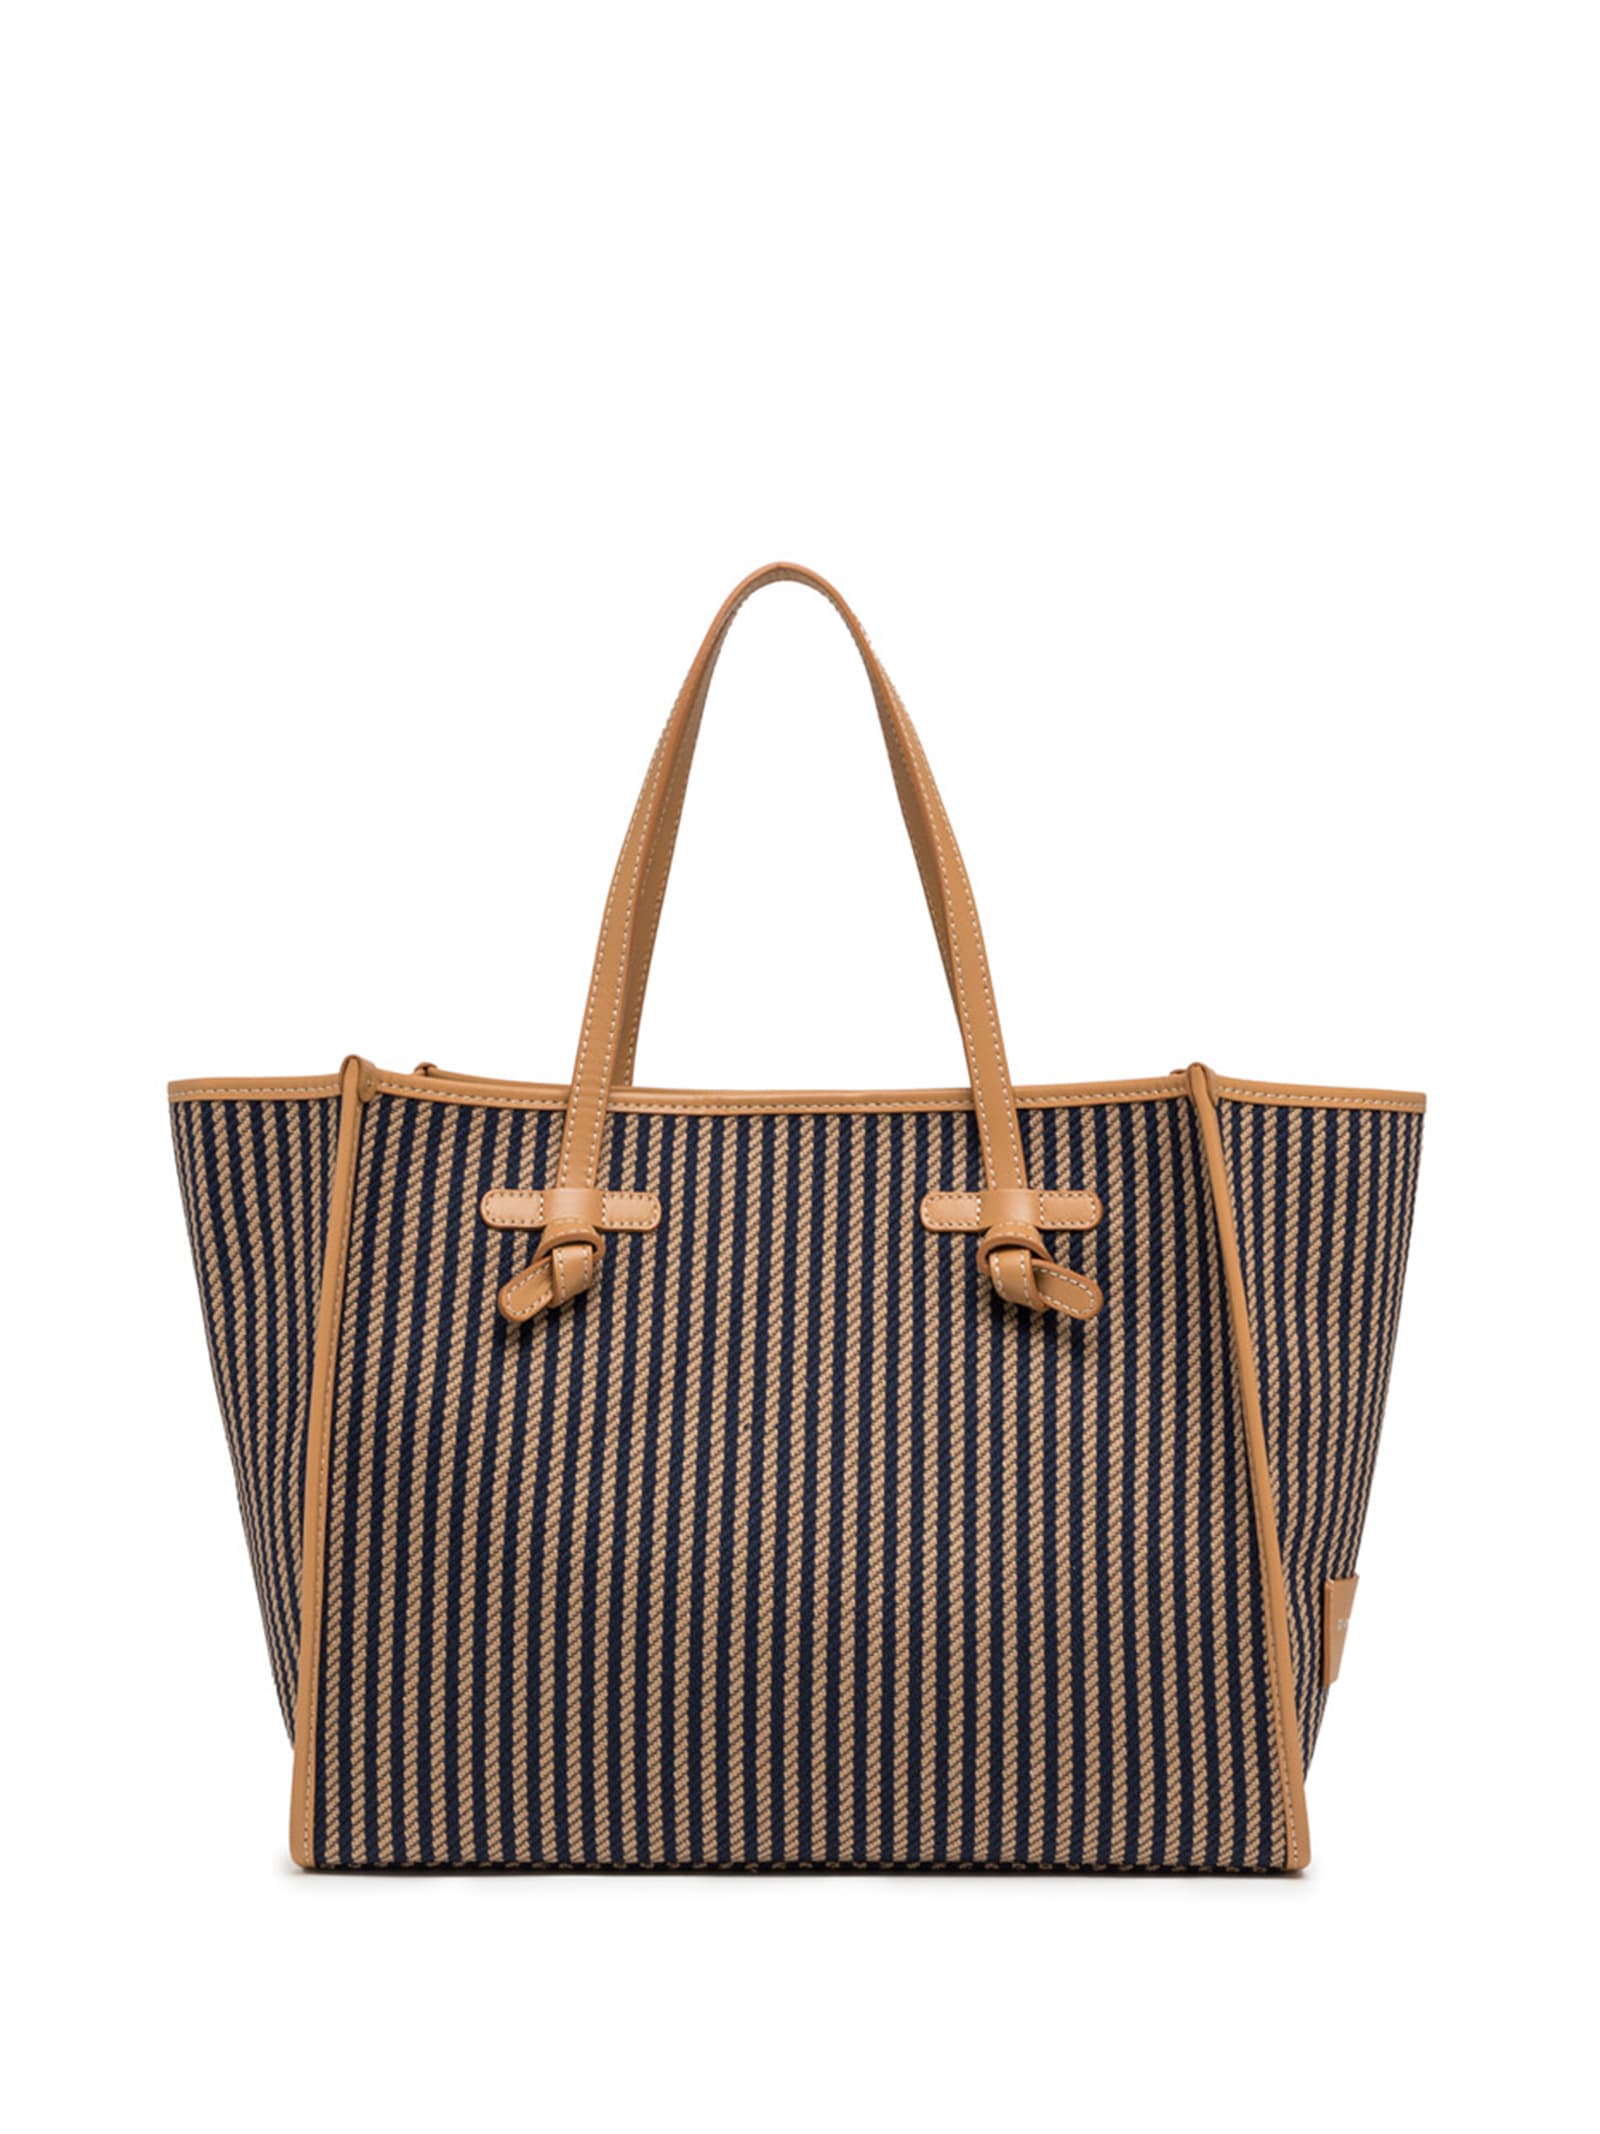 Shop Gianni Chiarini Marcella Shopping Bag In Canvas With Striped Pattern In Var.navy